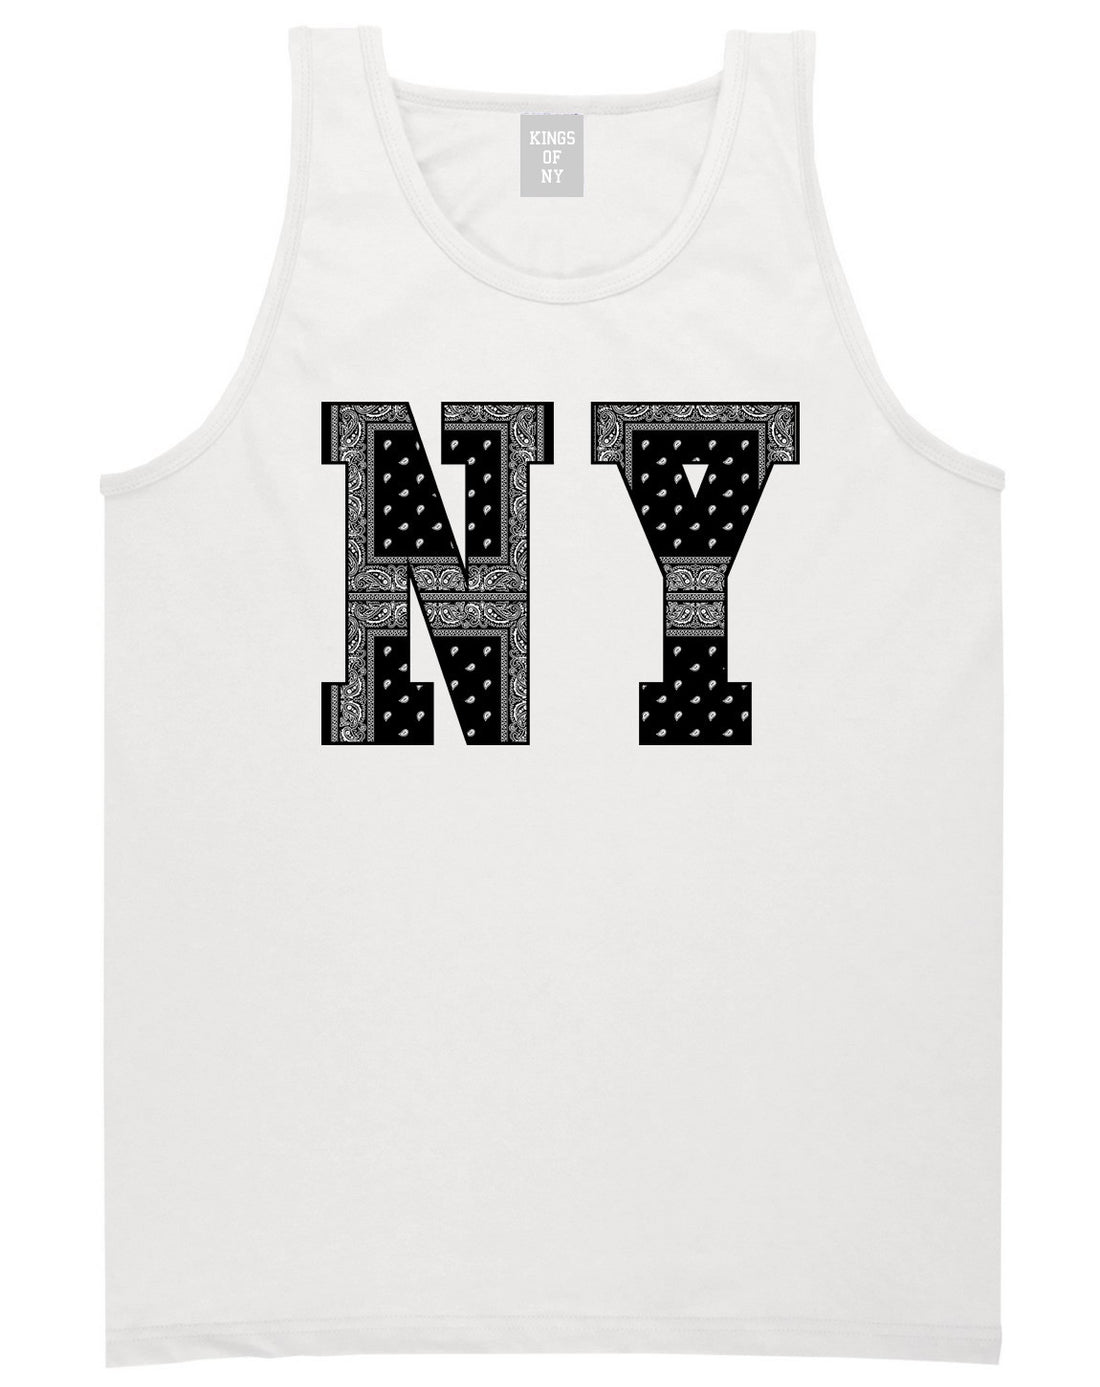 New York Bandana NYC Black by Kings Of NY Gang Flag Tank Top In White by Kings Of NY